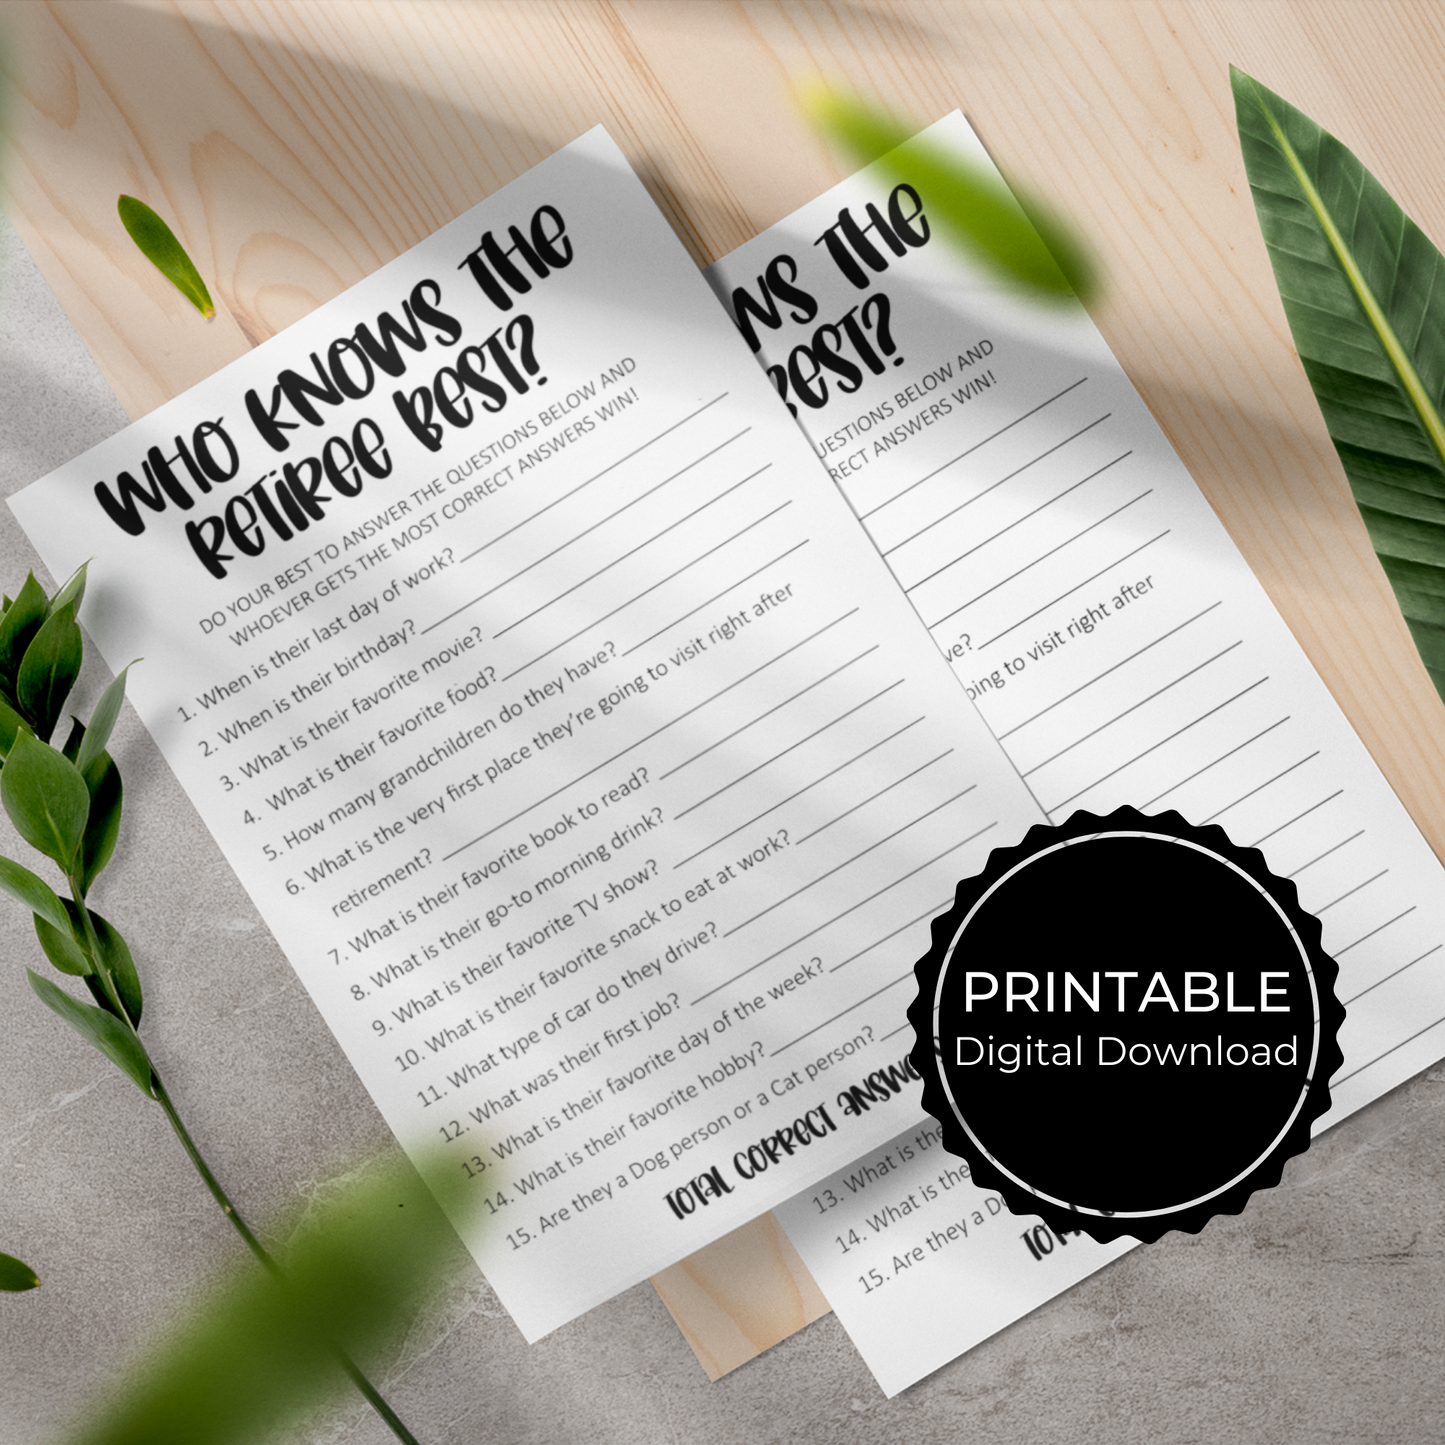 Who Knows the Retiree Best Retirement Party Game Printable - Droo & Aya